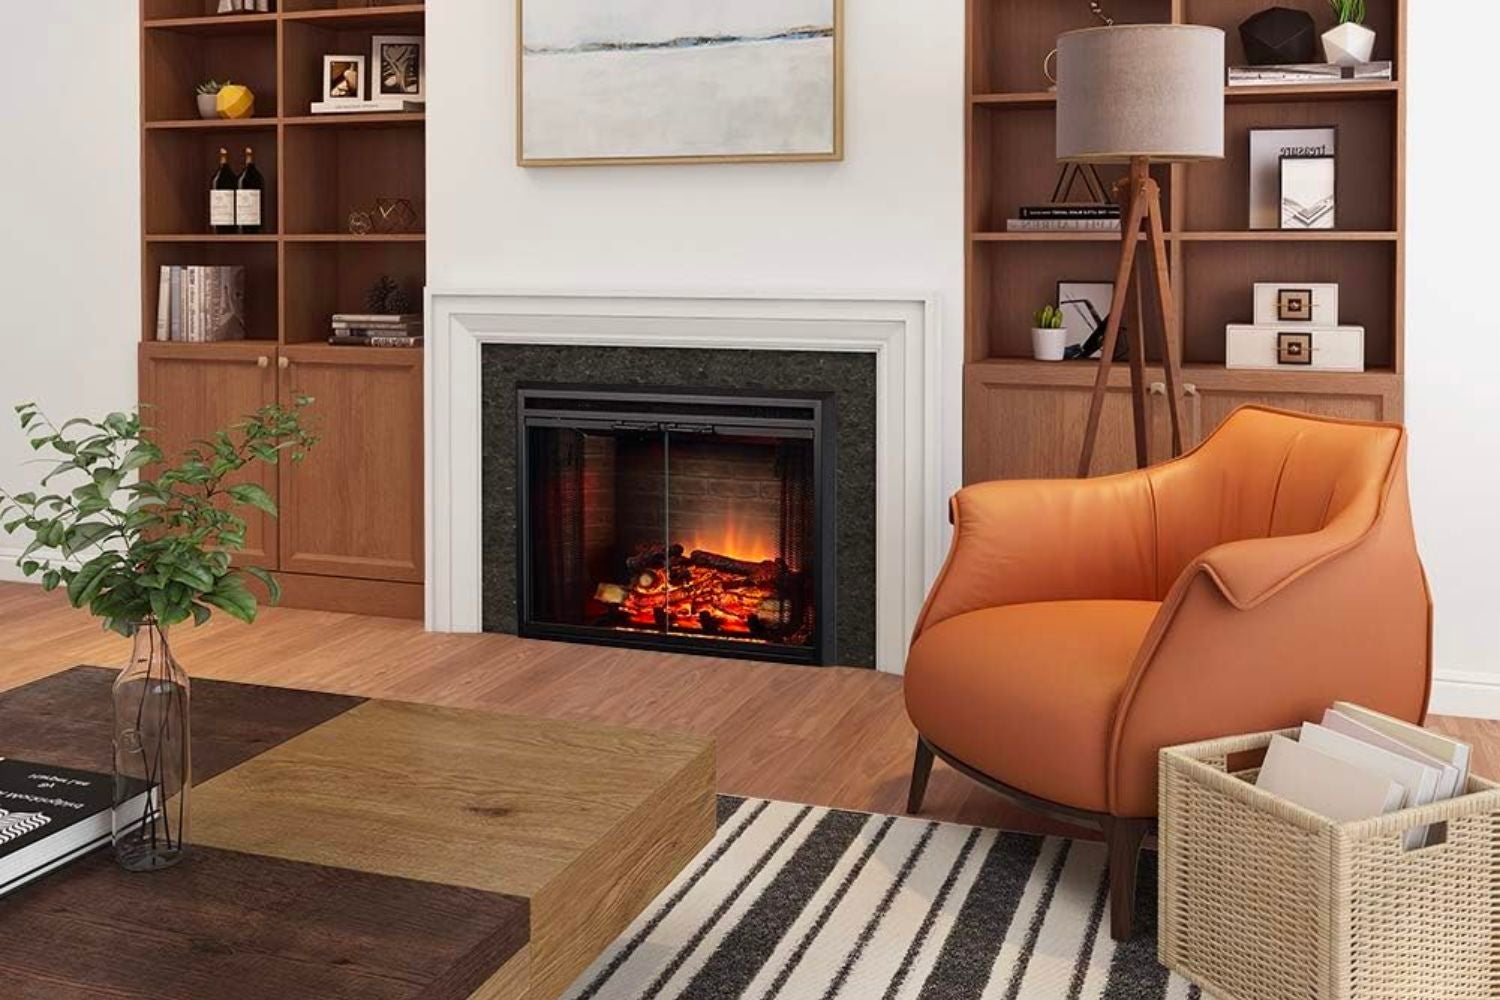 How To Frame In A Fireplace Insert